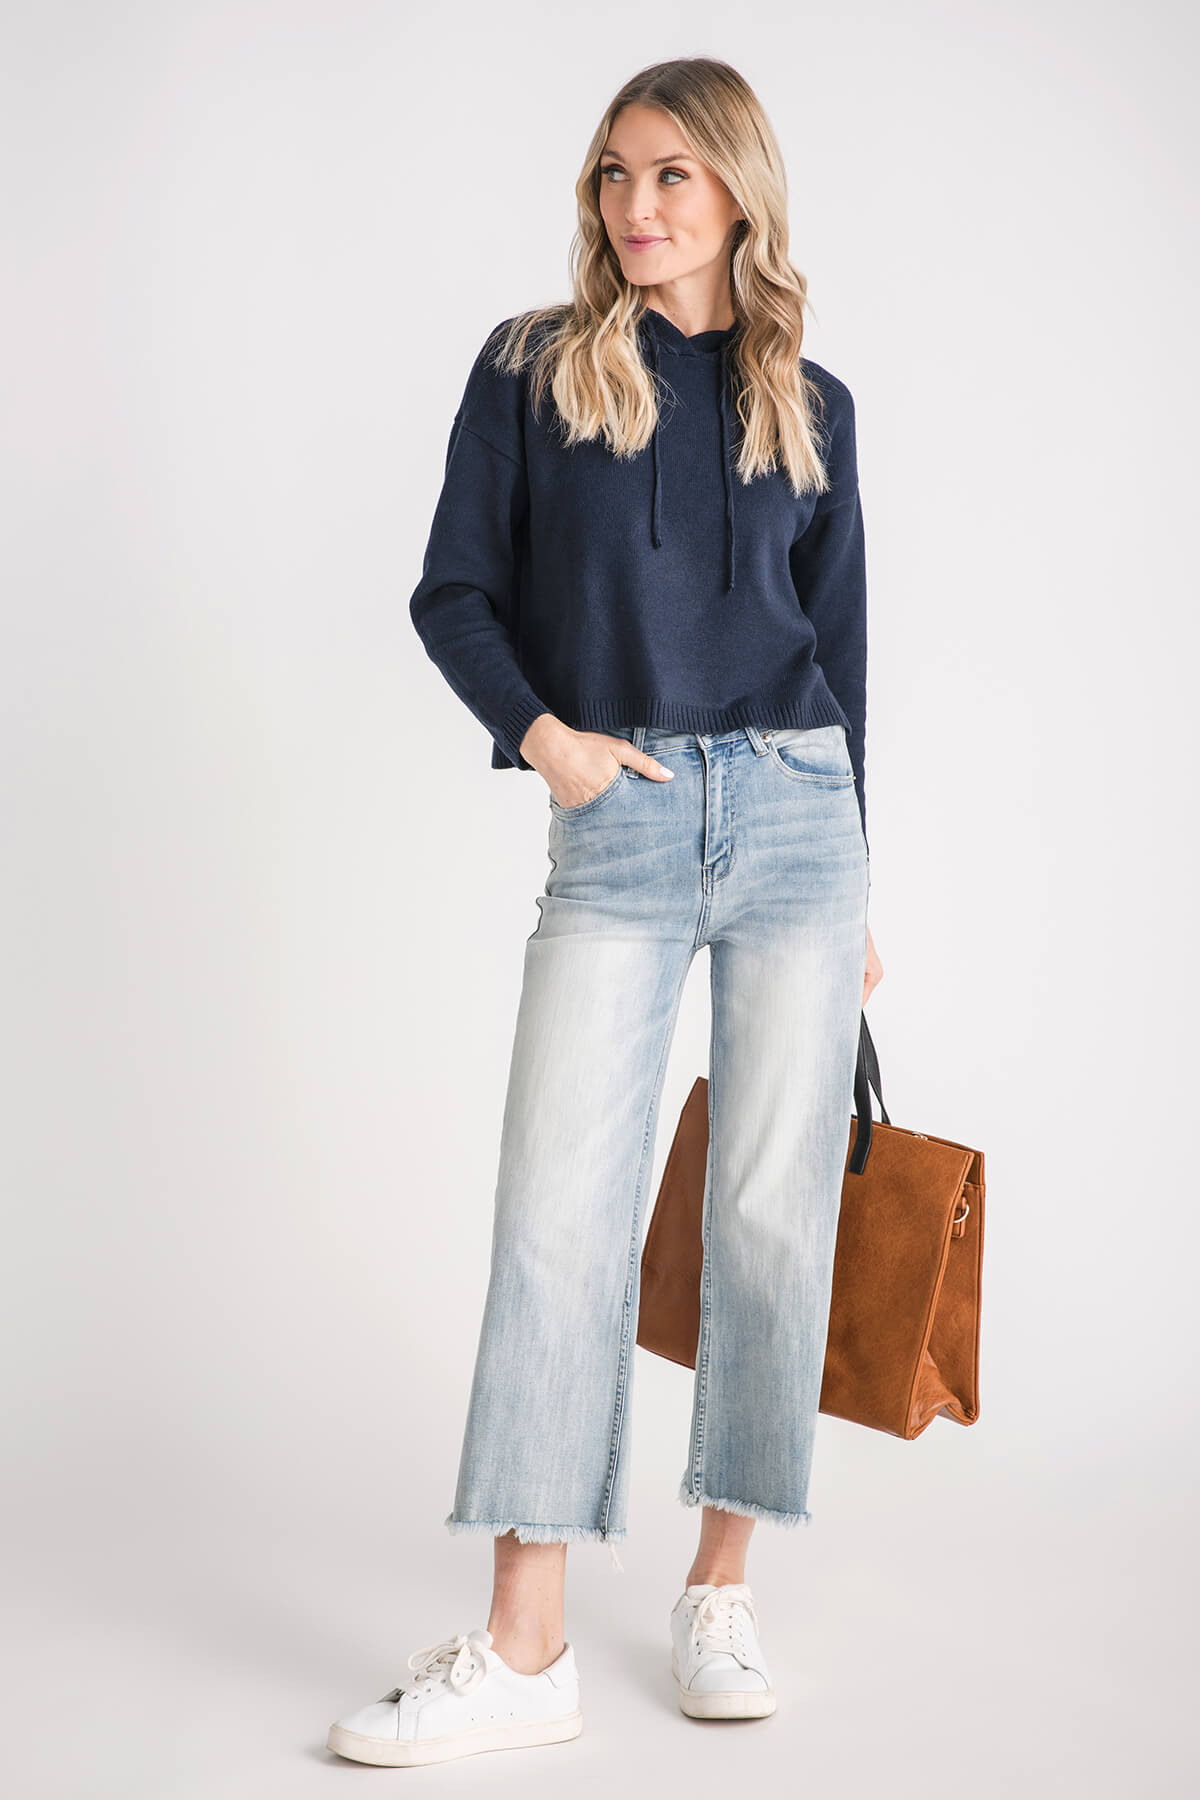 Risen Lighter Days Cropped Jeans